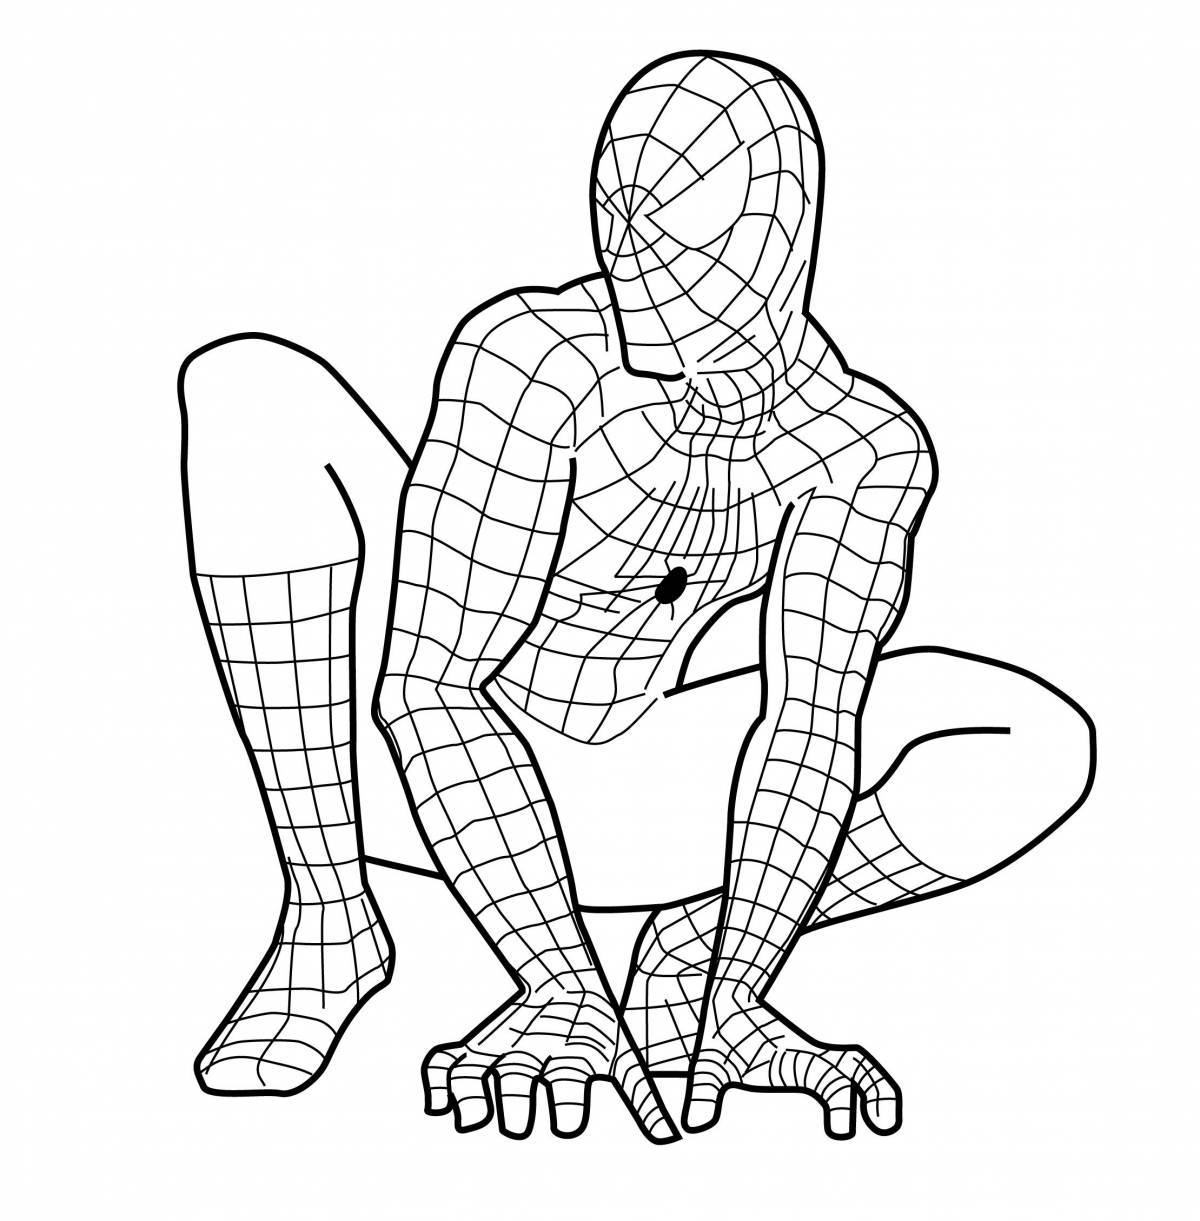 Joyful spider-man coloring pages for boys